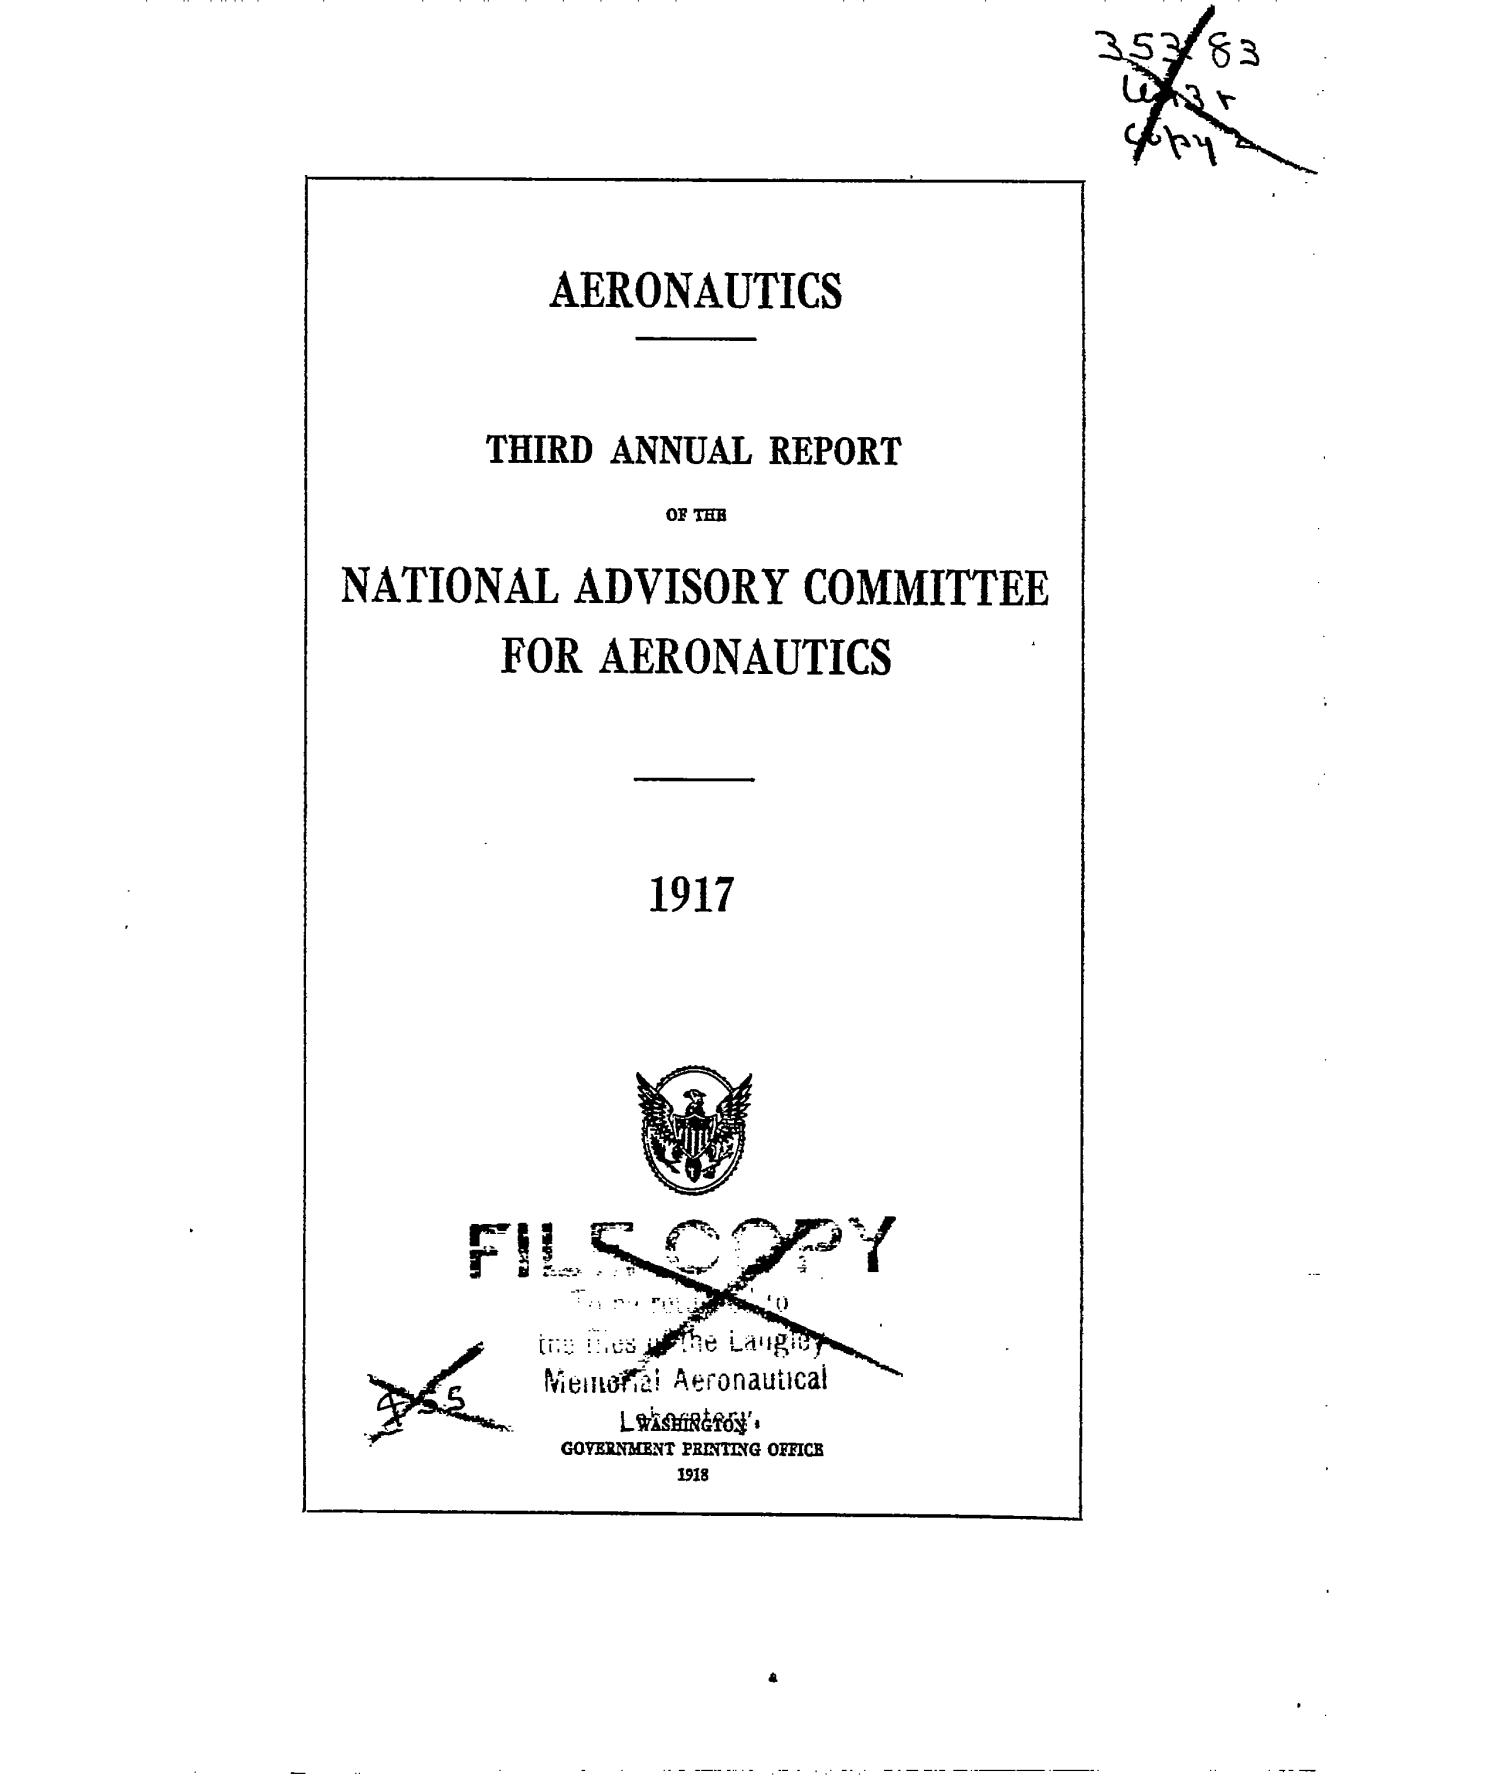 Annual Report of the National Advisory Committee for Aeronautics (3rd). Administrative Report Including Technical Report Nos. 13 to 23
                                                
                                                    [Sequence #]: 1 of 33
                                                